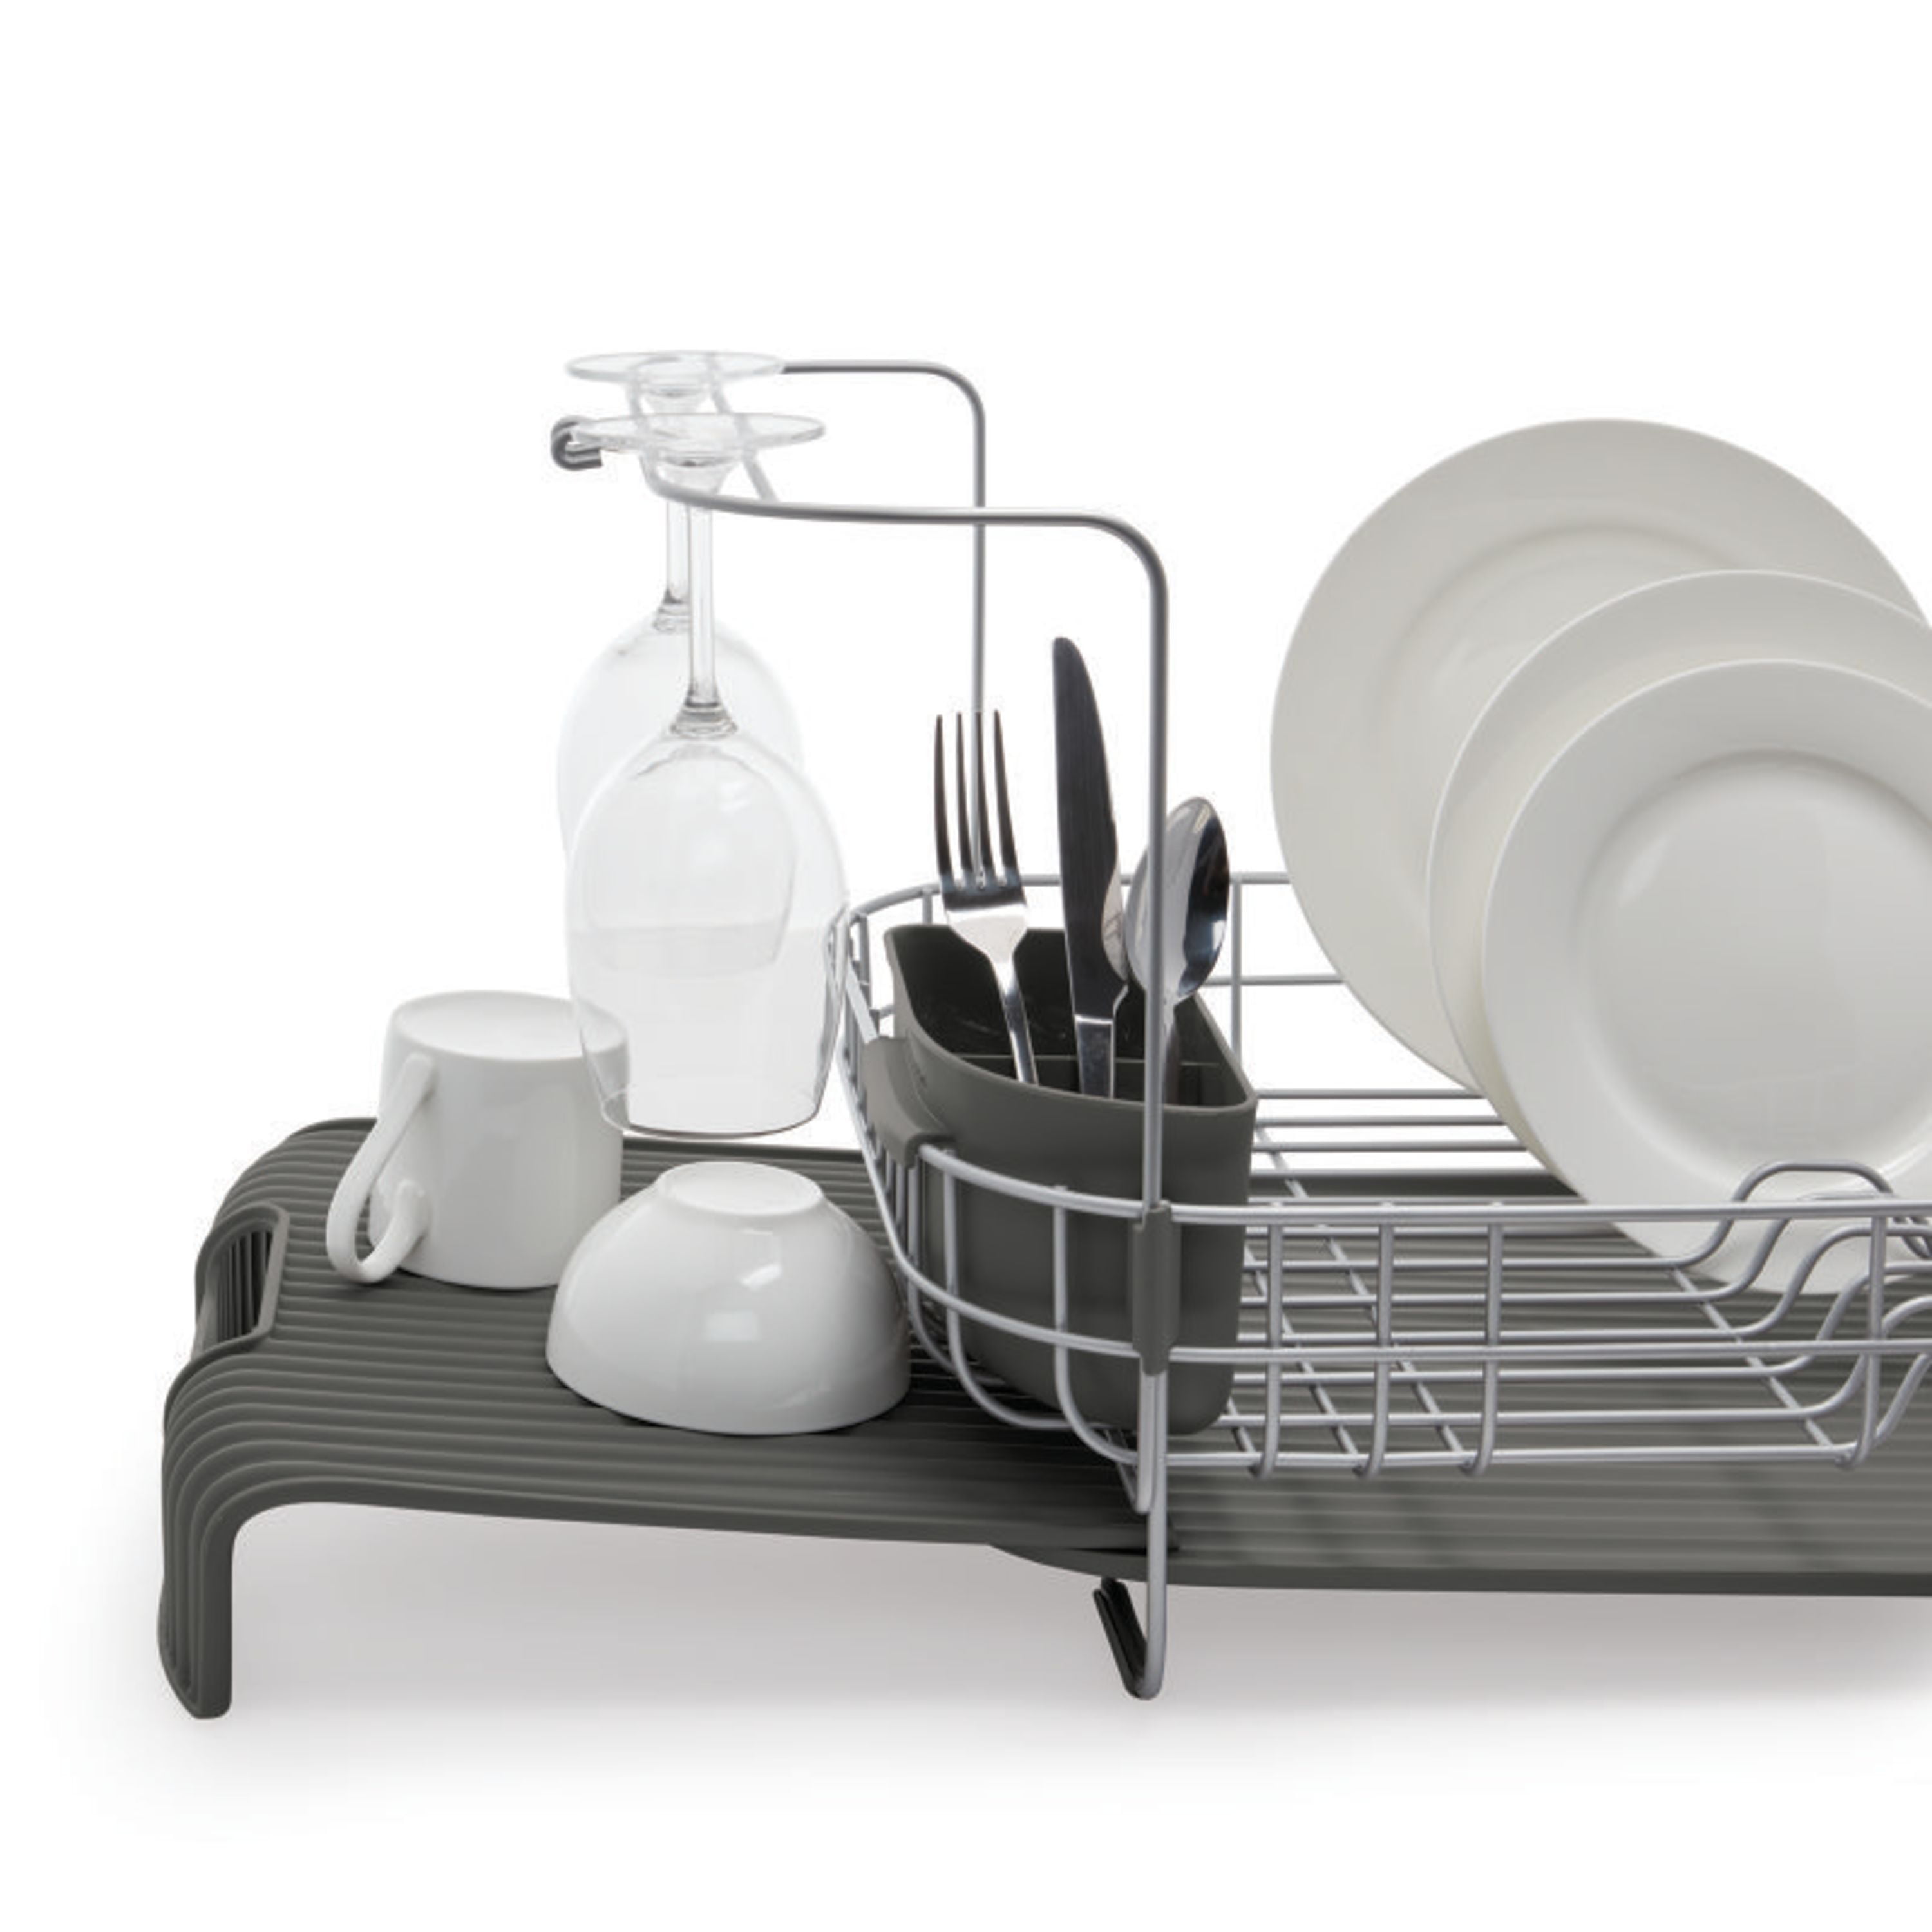 KitchenAid compact dish-drying rack. 5e - Lil Dusty Online